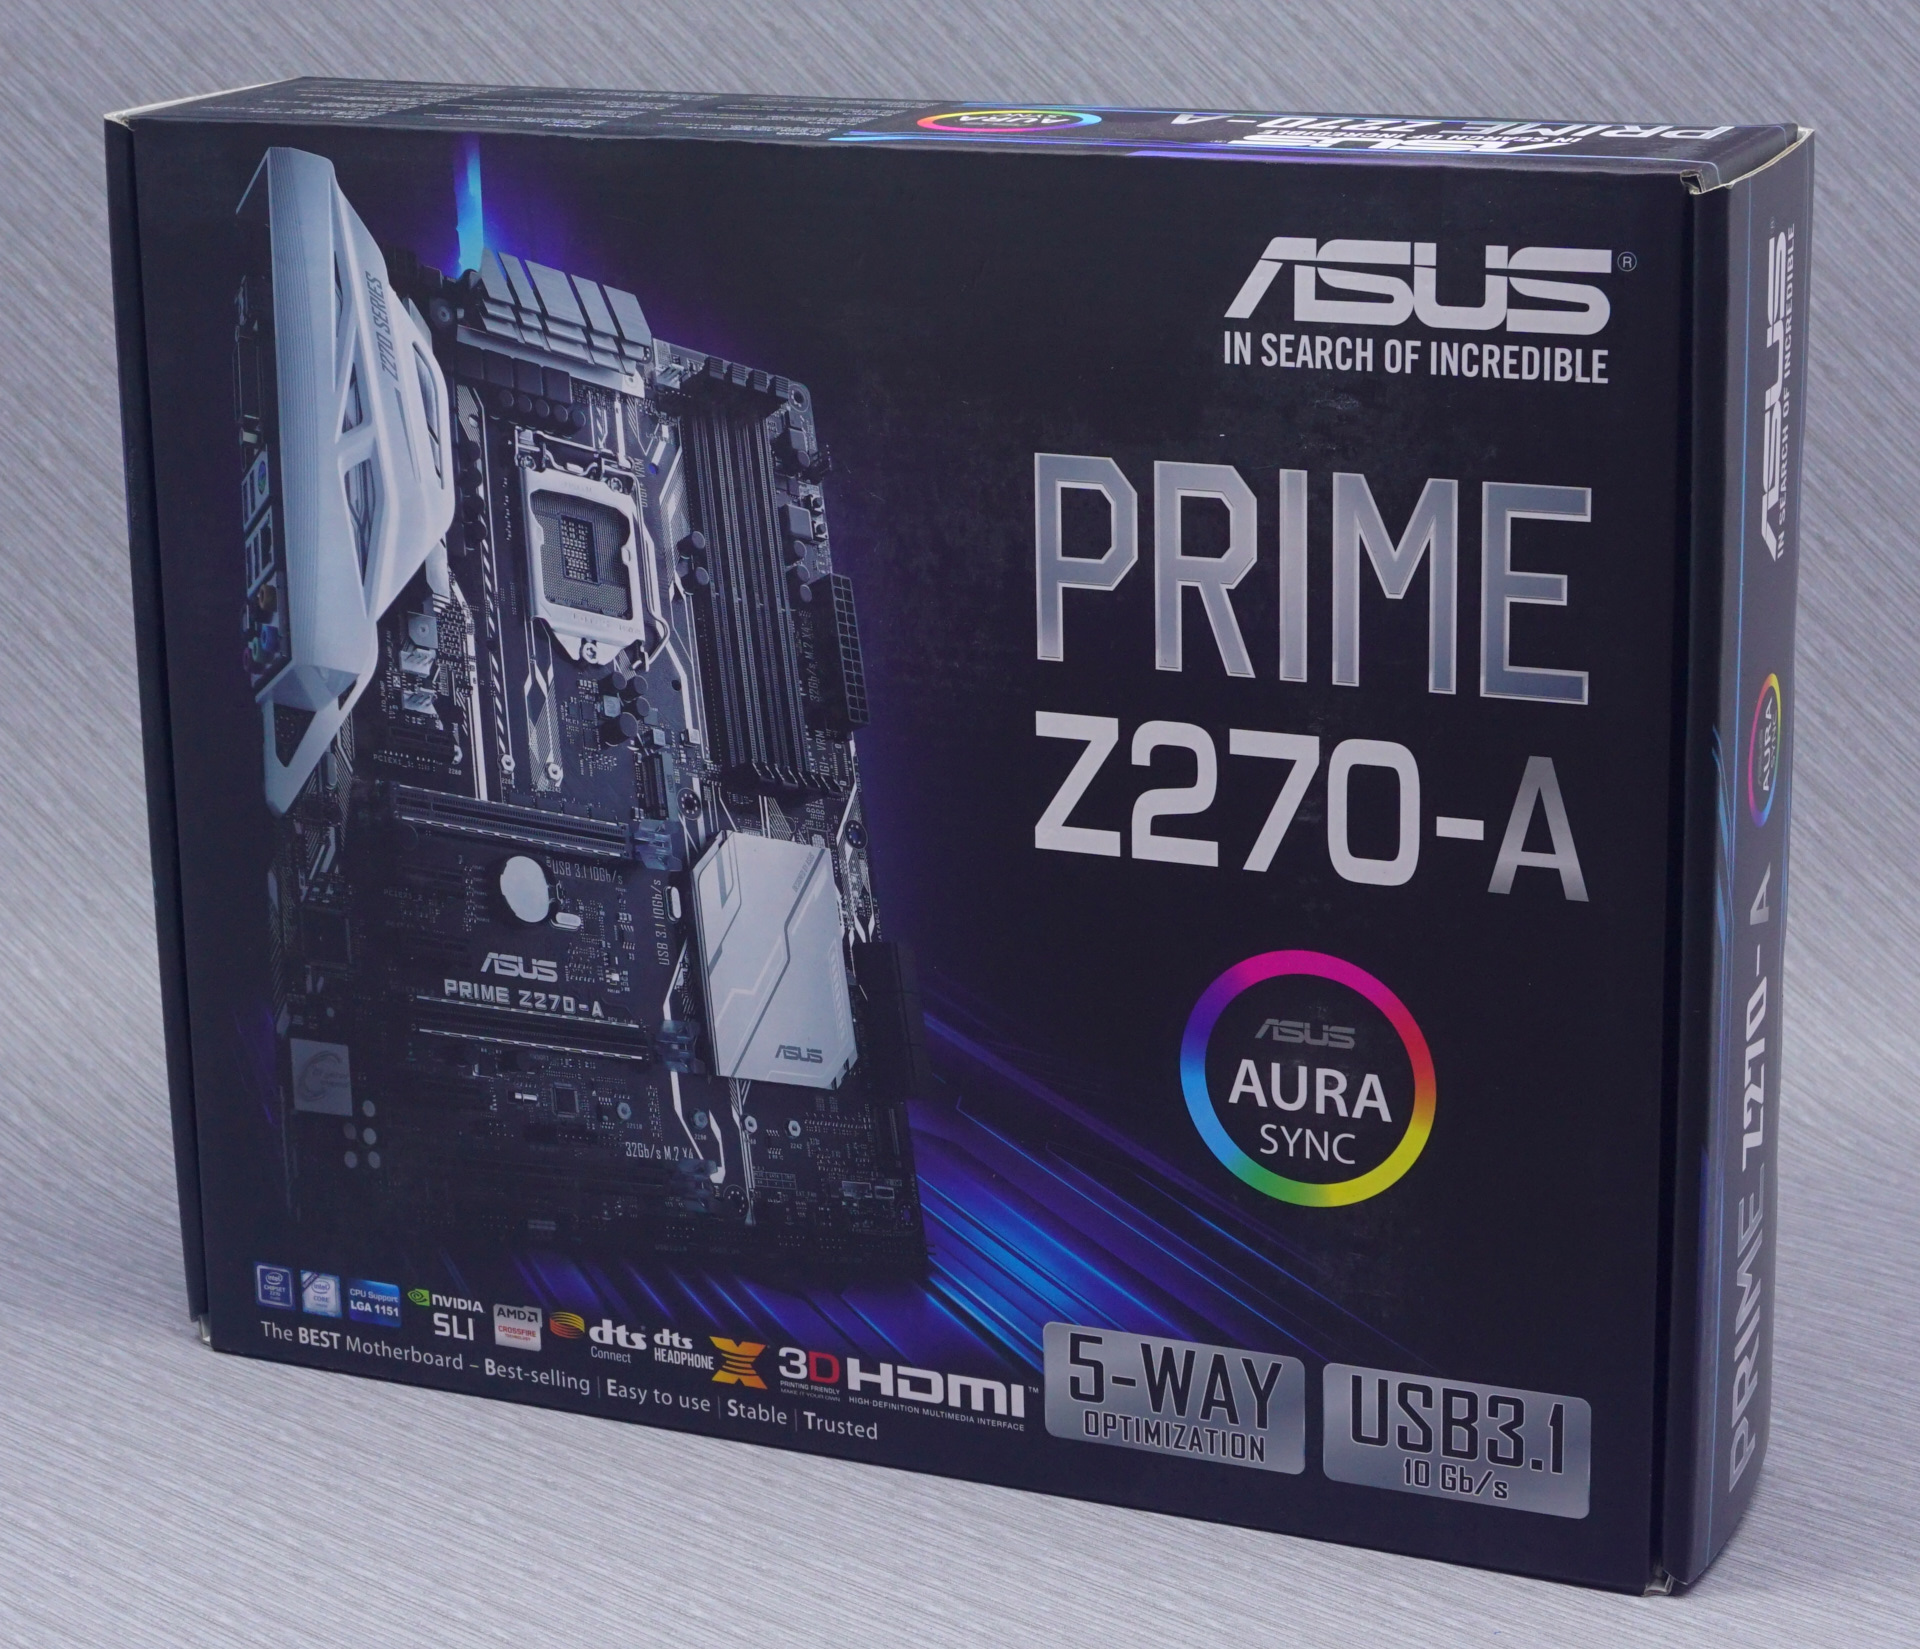 mynte matrix sorg Asus Prime Z270-A Board Features, Visual Inspection - The Asus Prime Z270-A  & GIGABYTE Z270X-Ultra Gaming Motherboard Review